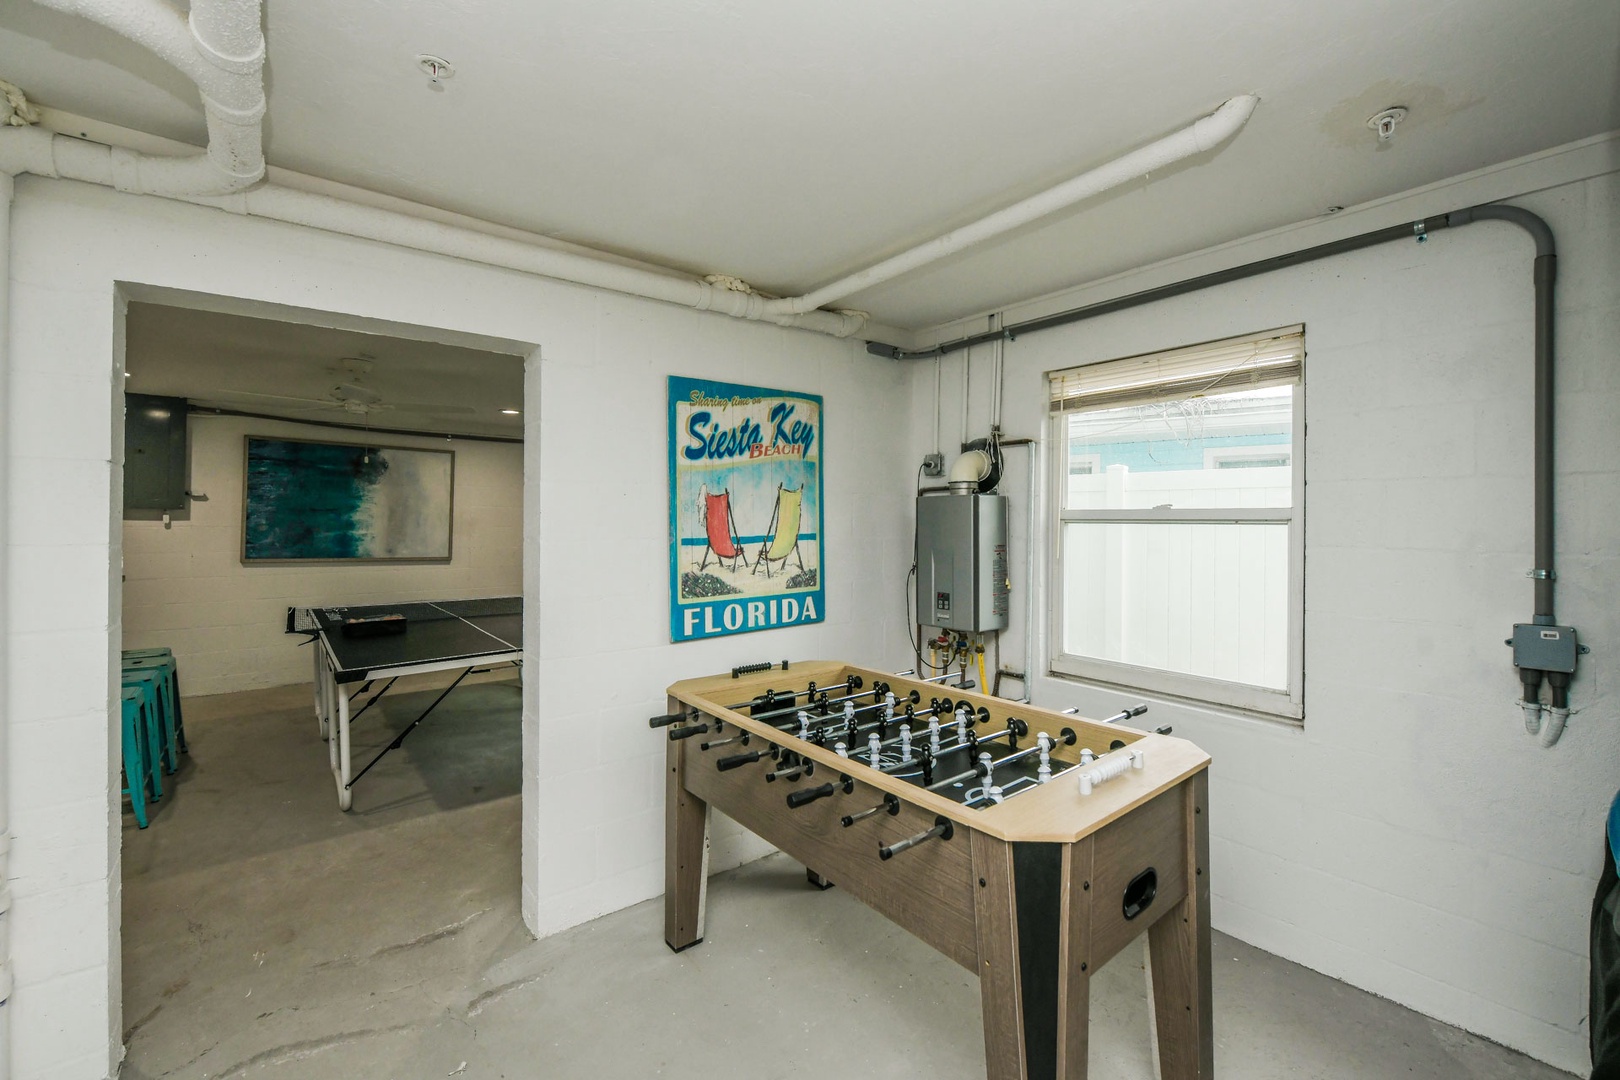 Game Room - Foosball and Ping Pong